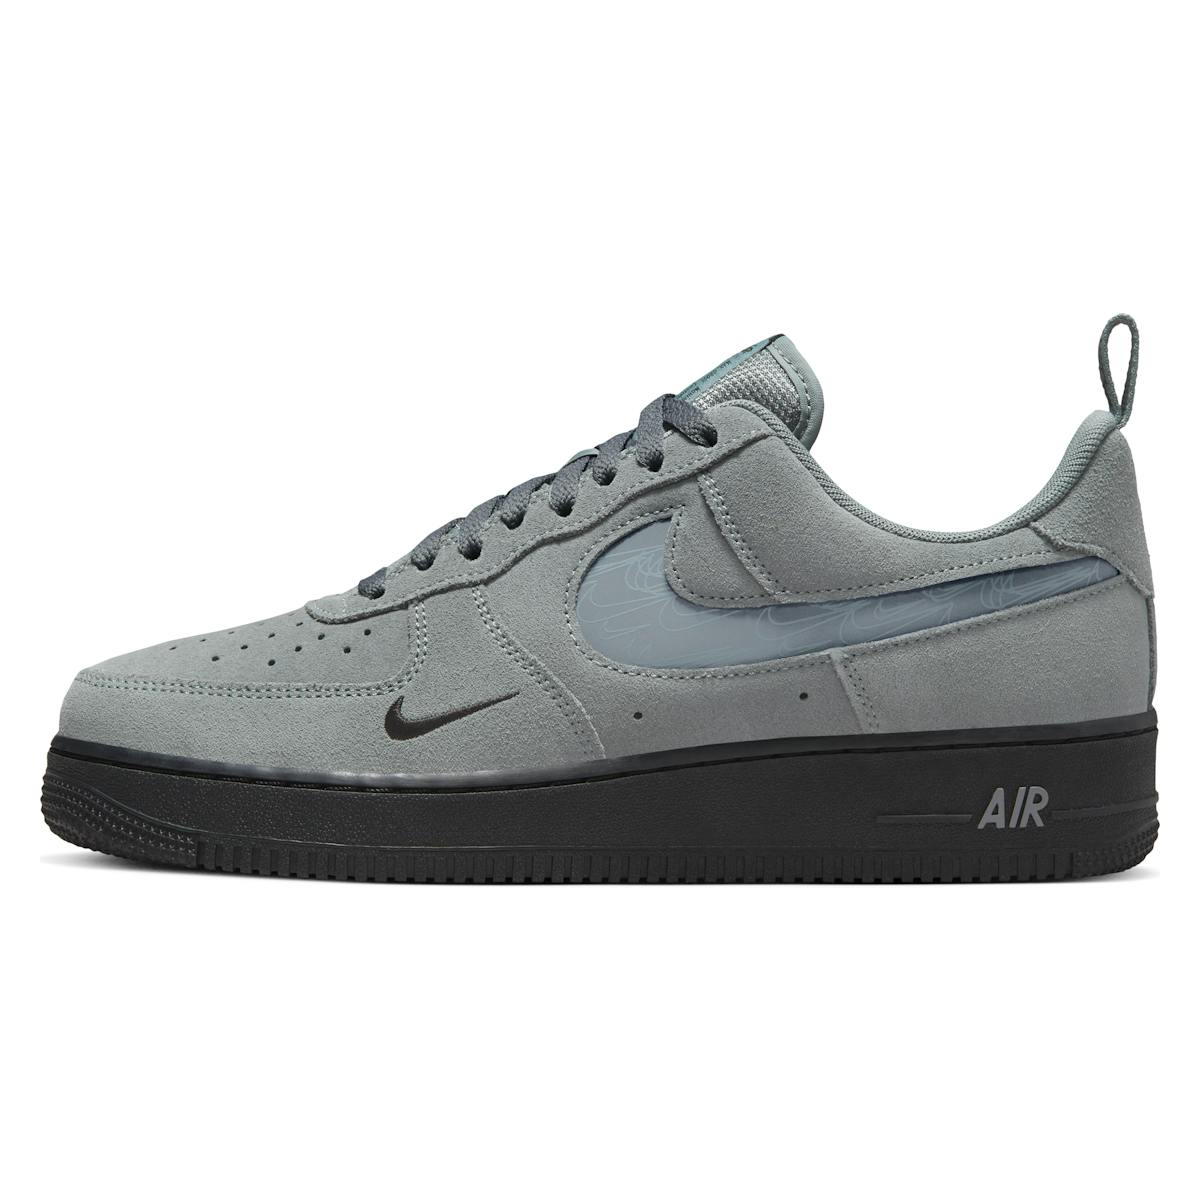 Nike Air Force 1 '07 LV8 "Cool Grey Suede"